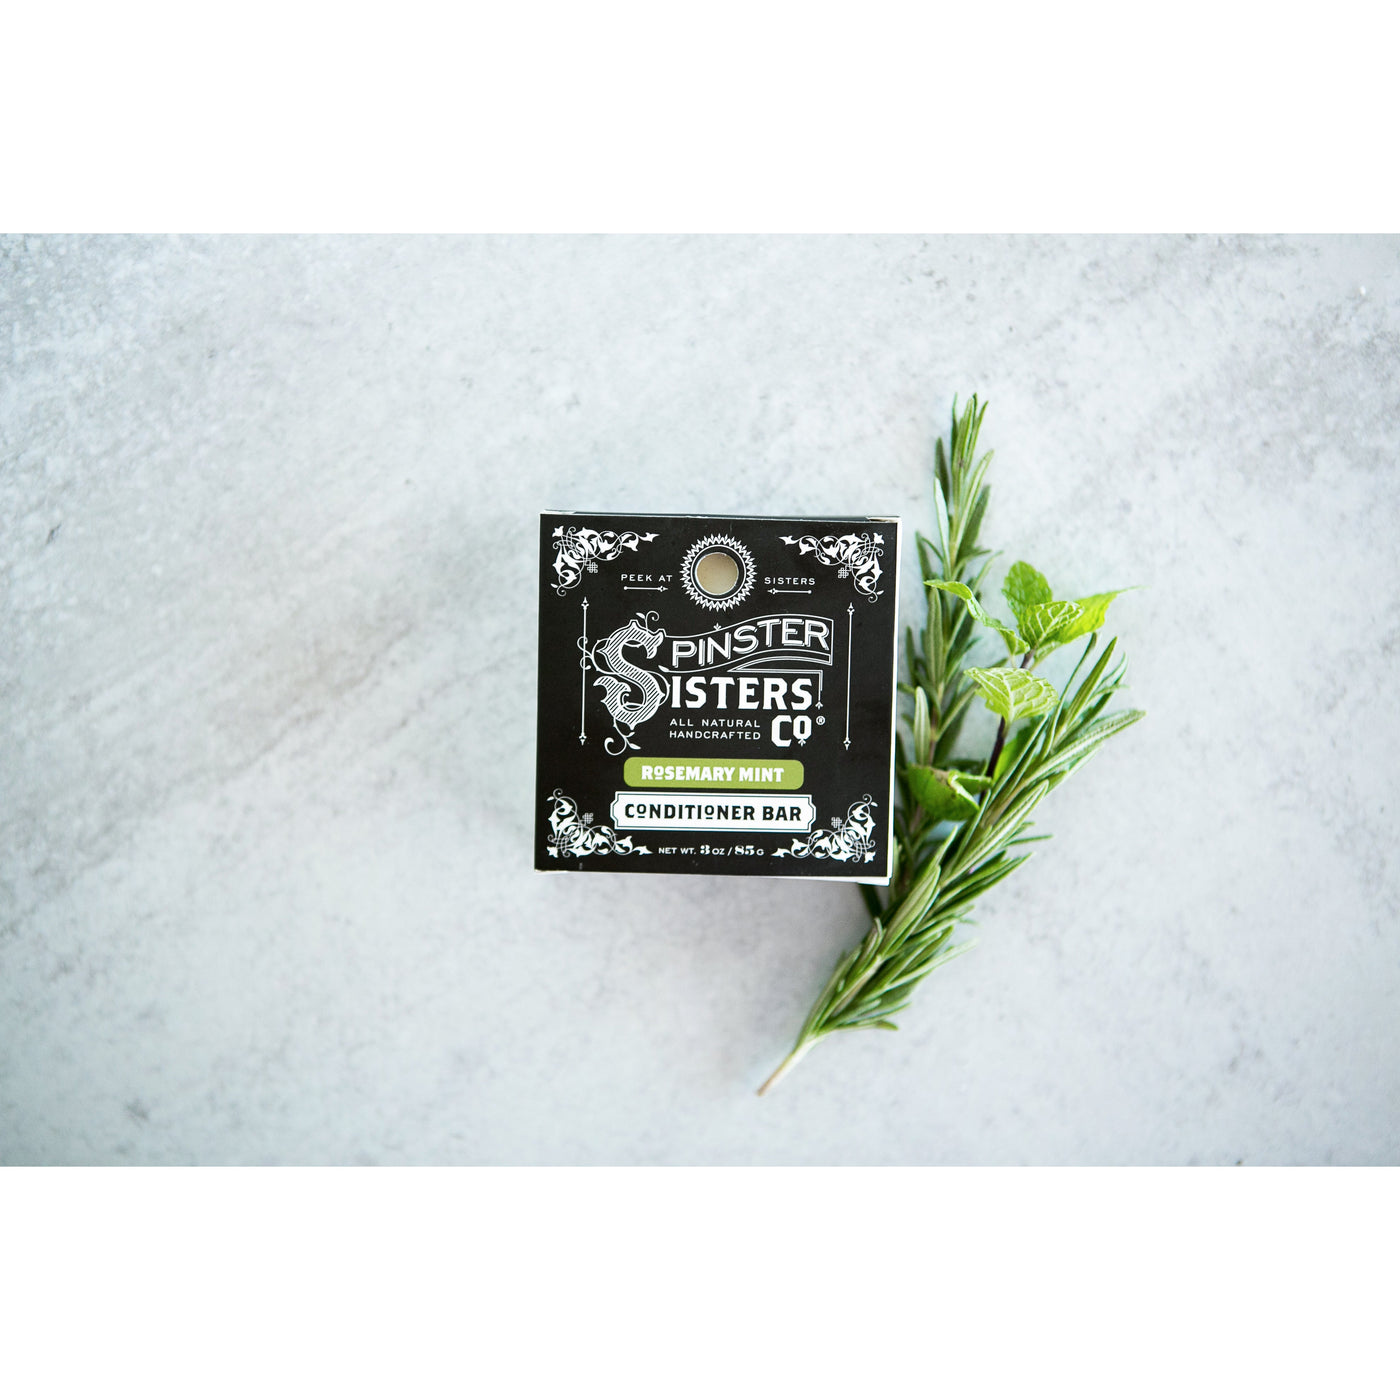 Spinster Sisters CO | Hair Conditioner Bar | Rosemary Mint